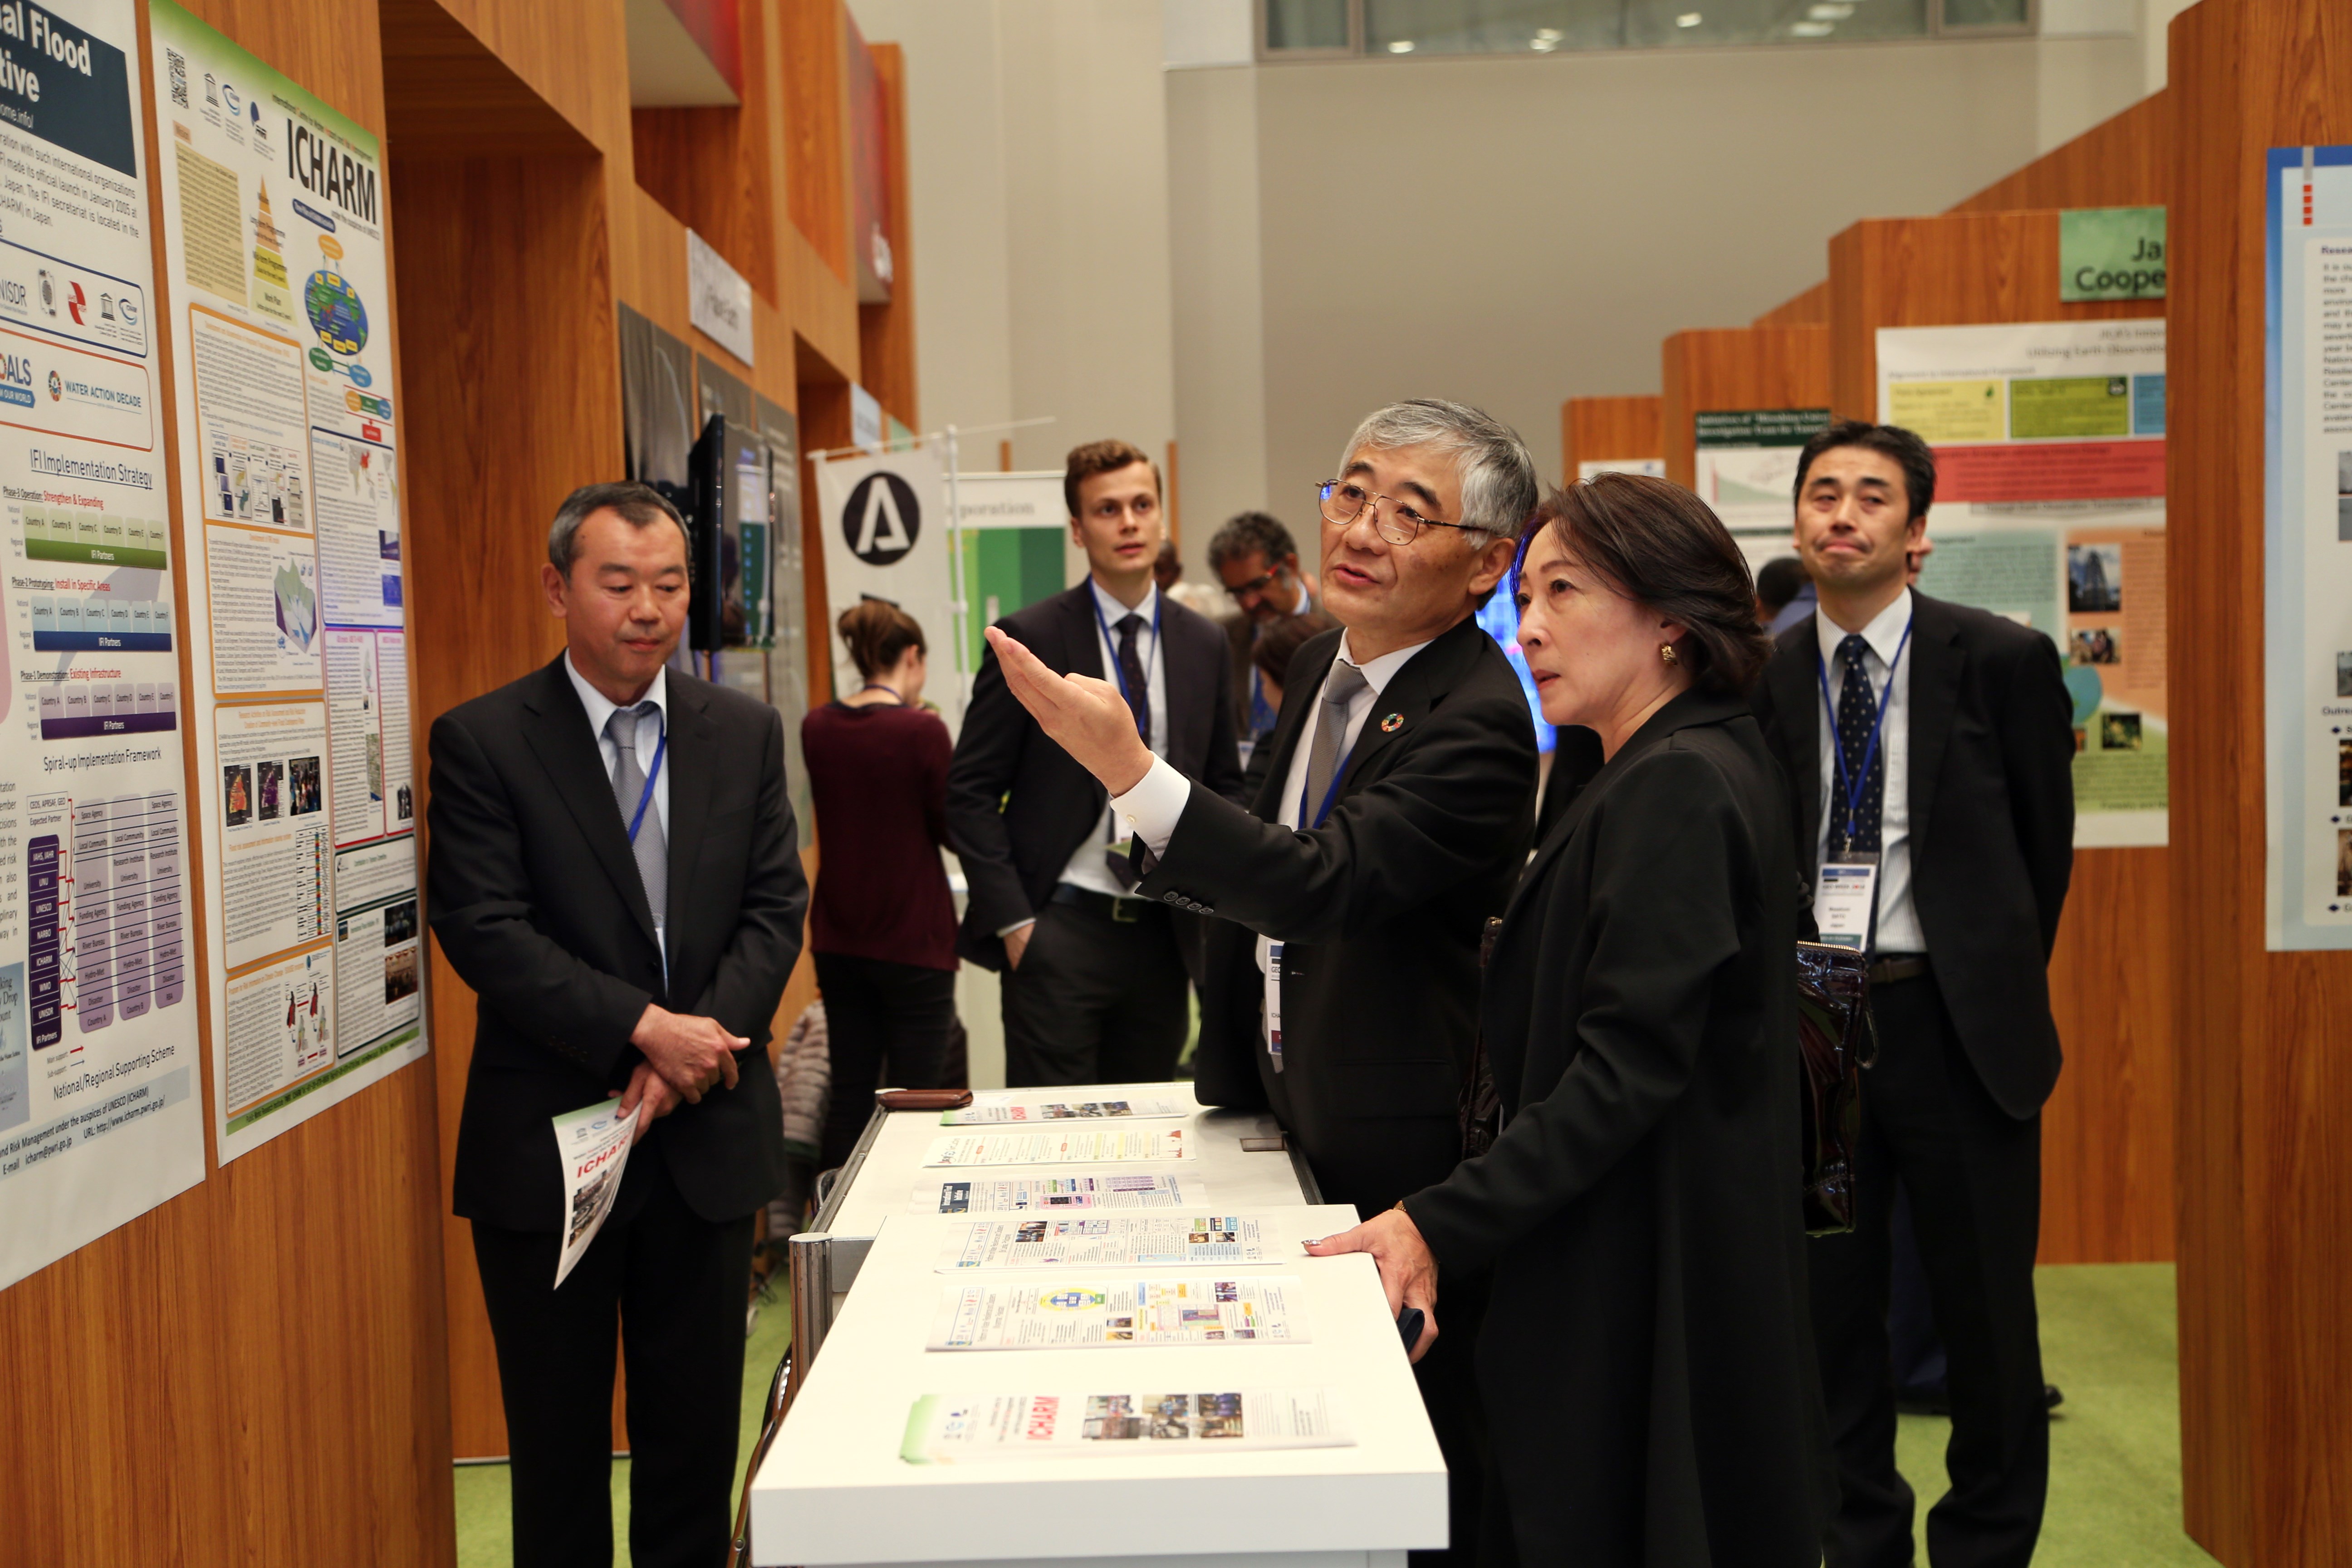 ICHARM Director Toshio Koike speaks with Mami Mizutori, Special Representative of the United Nations Secretary-General for Disaster Risk Reduction, at the GEO Week 2018 Exhibition.